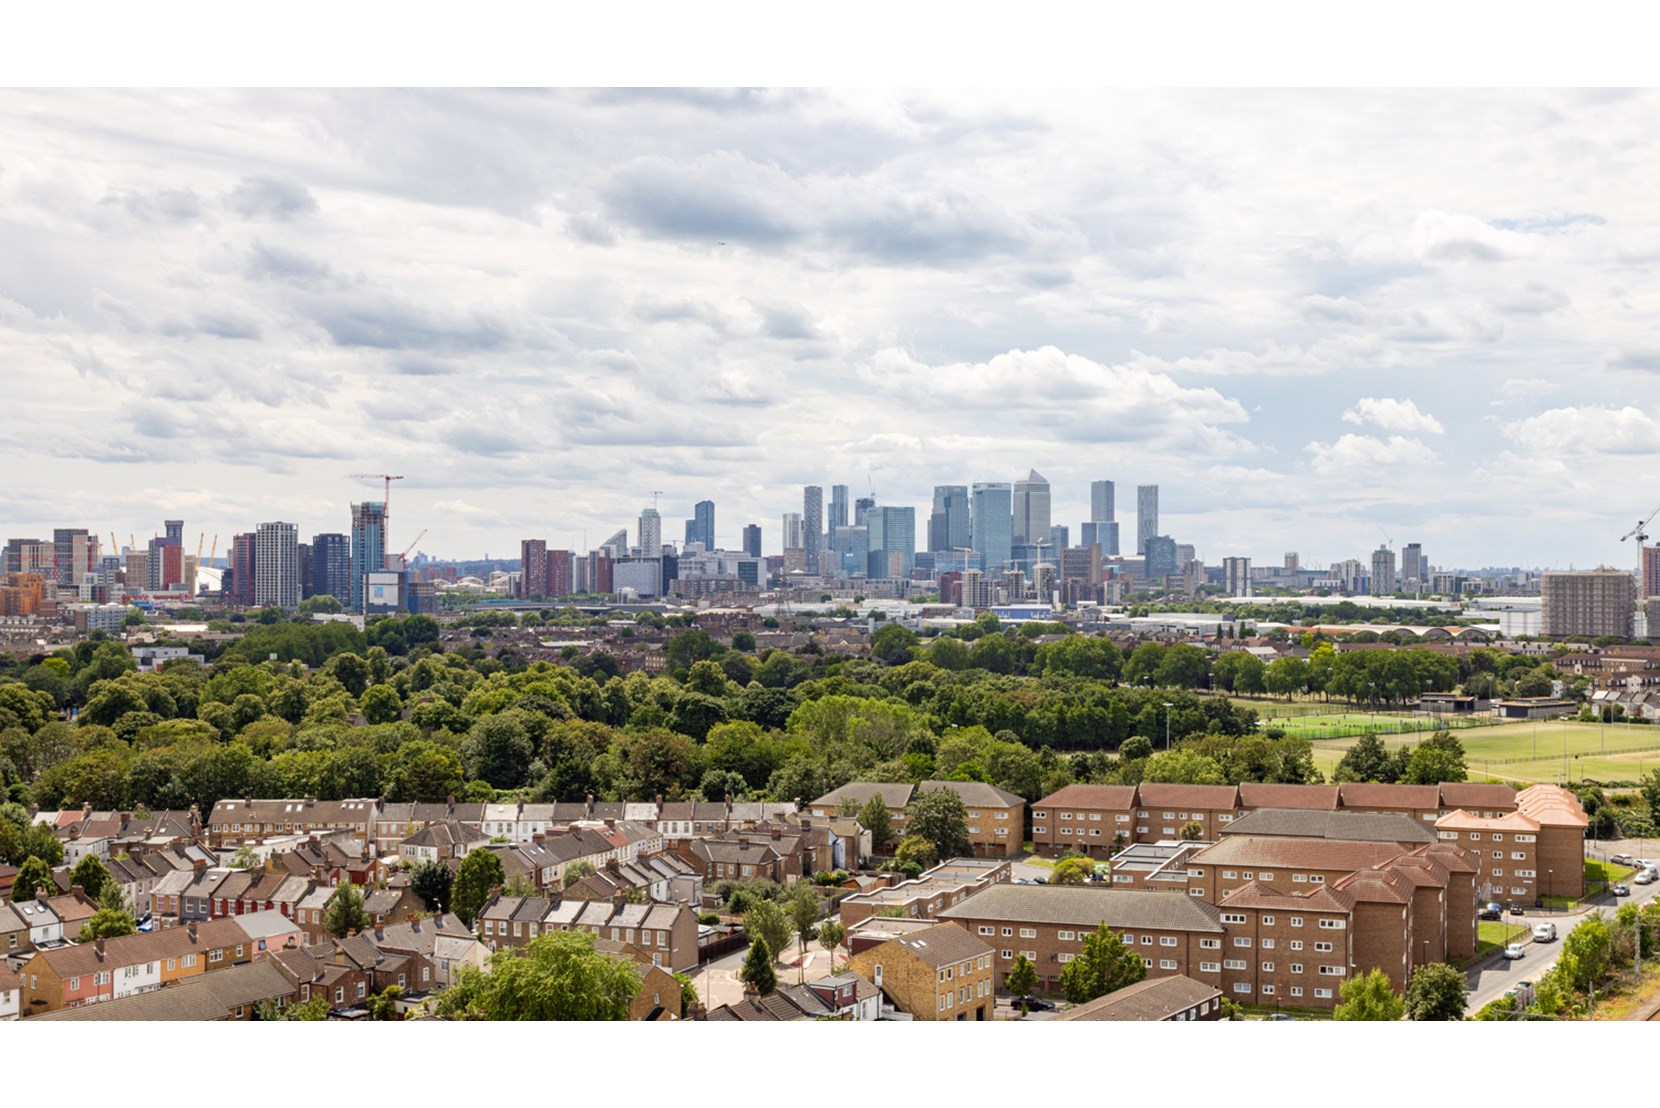 Apartments to Rent by Populo Living at Plaistow Hub, Newham, E13, 13th floor panoramic view